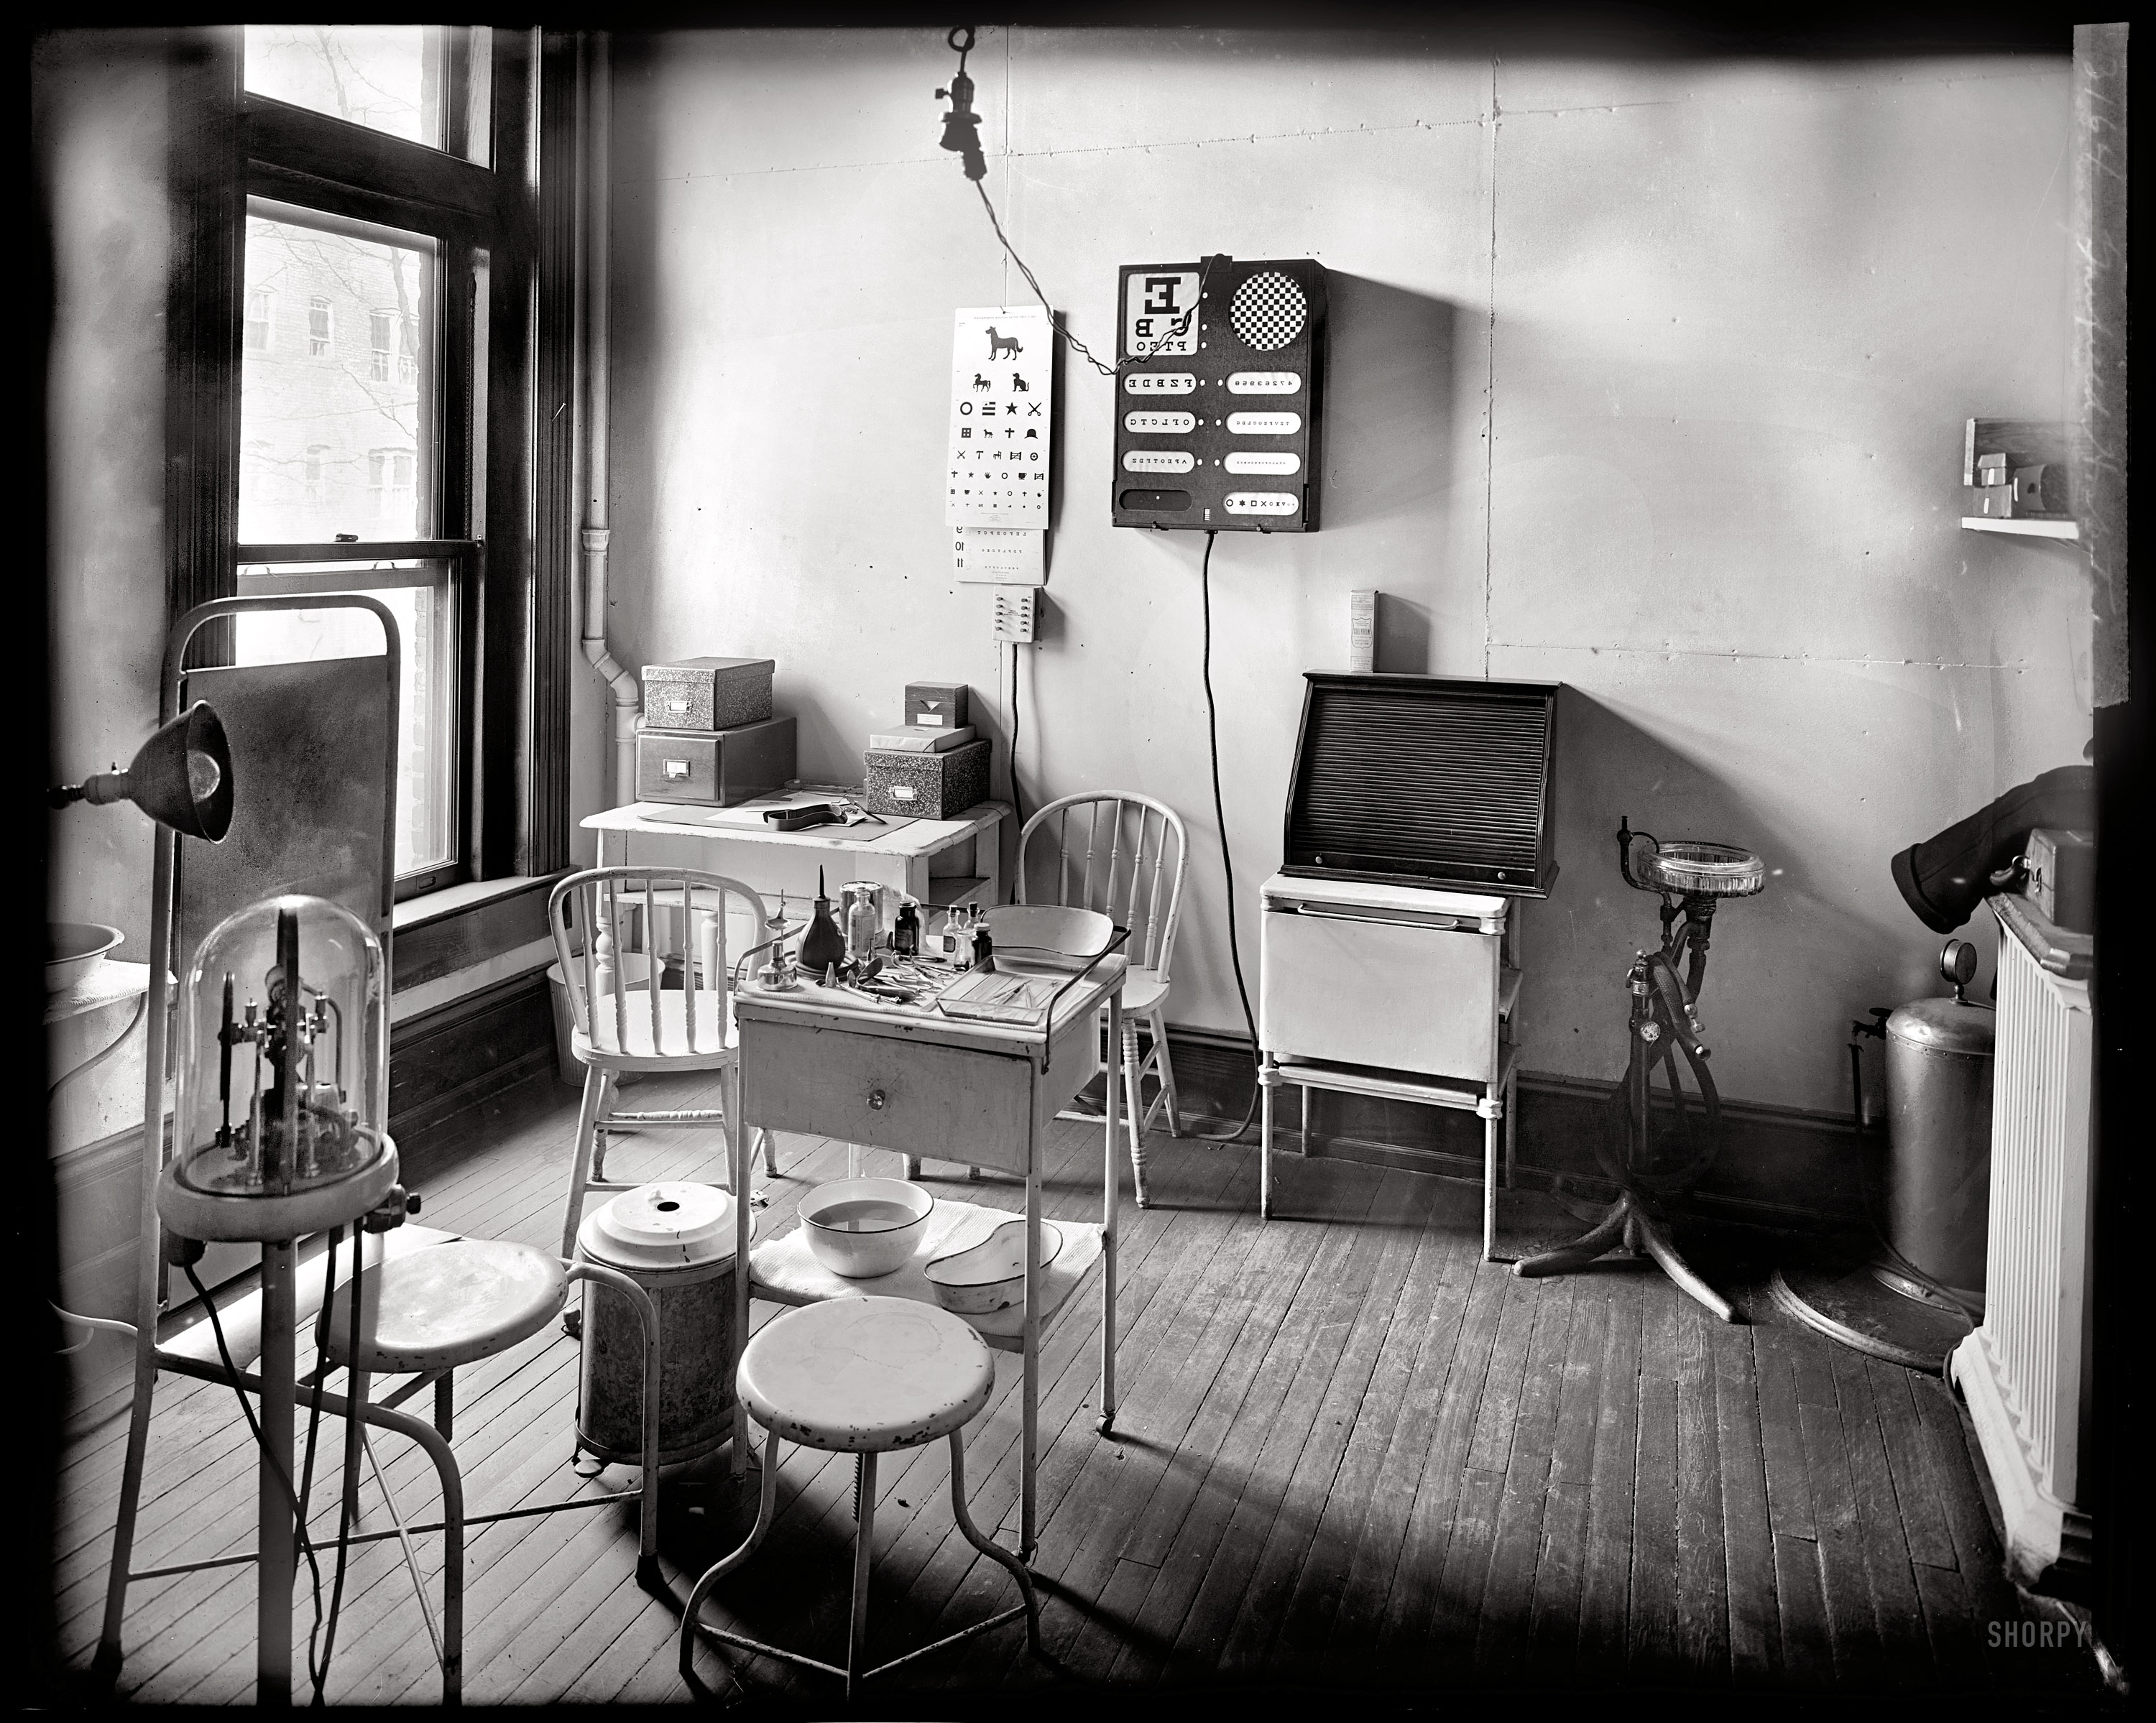 Washington, D.C., circa 1924. "Examination room, Garfield Hospital." Home to all the latest equipment. National Photo glass negative. View full size.